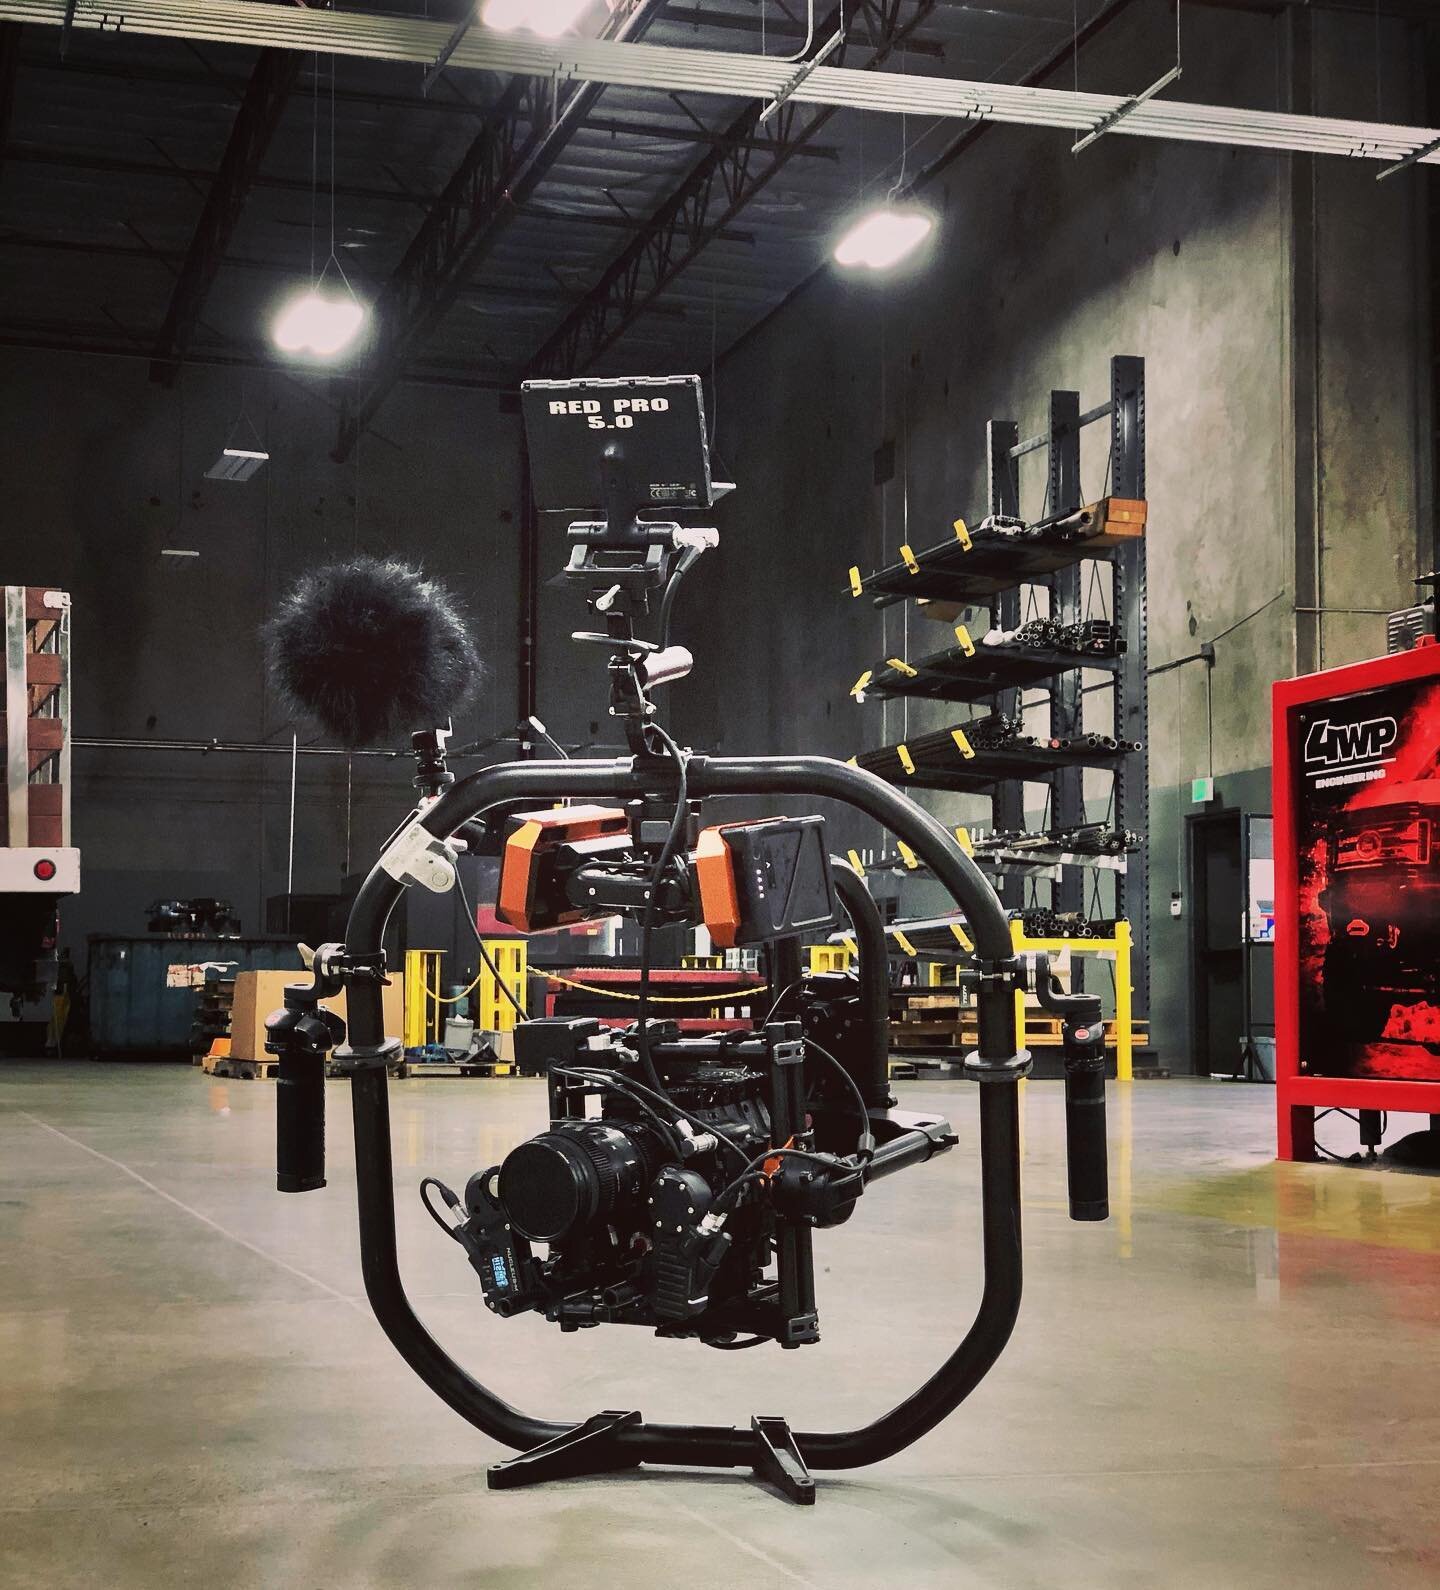 Loving my new @freeflysystems Movi Pro. It&rsquo;s Definitely an upgrade over my previous gimbal setup. After using it for an entire day though I&rsquo;m definitely realizing how out of shape I am. Might be time to go get a ready rig.
.
Follow @cncin